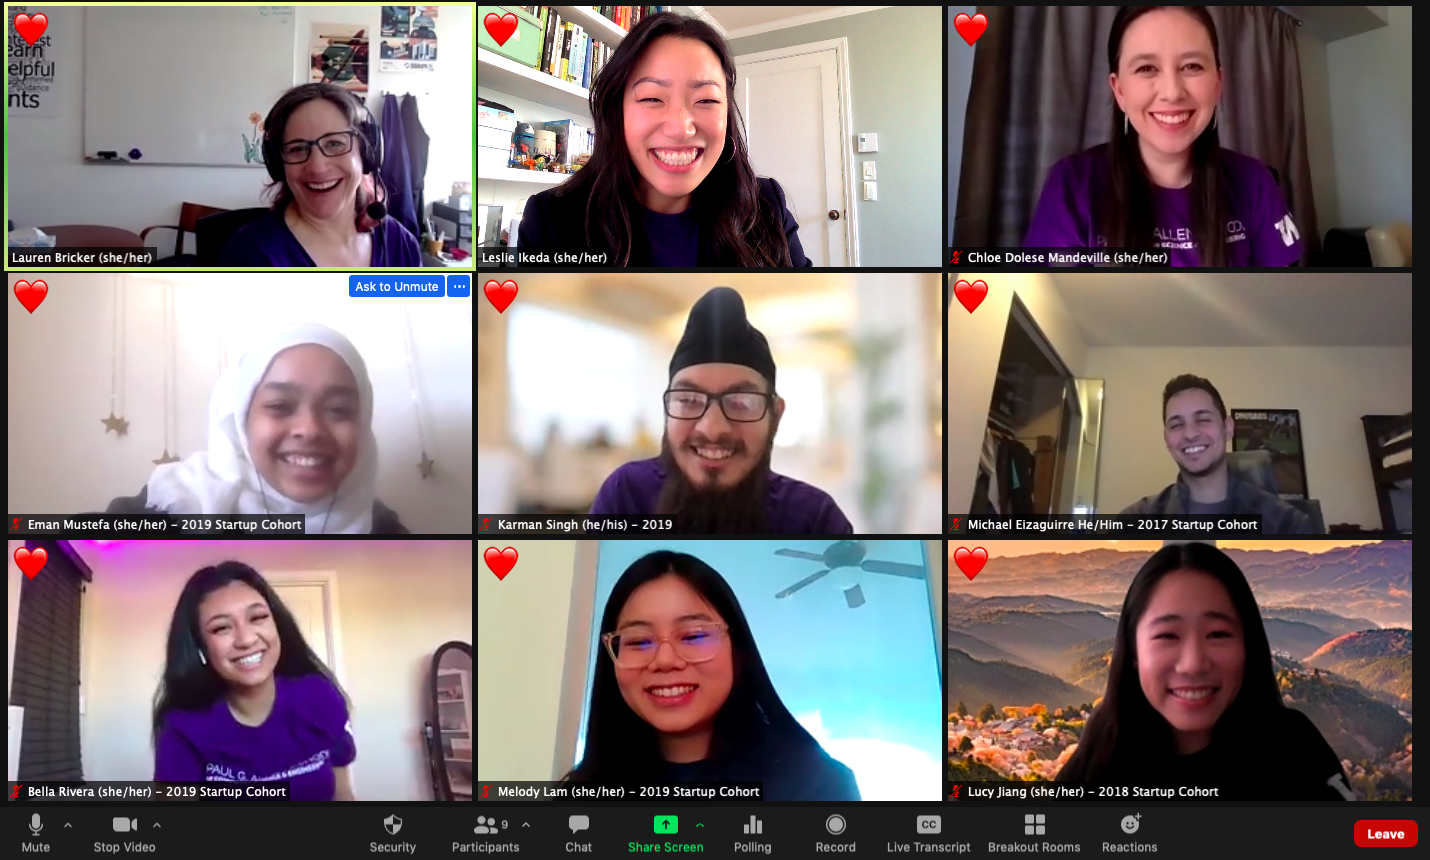 Group photo of nine smiling people on Zoom, each with heart reactions.